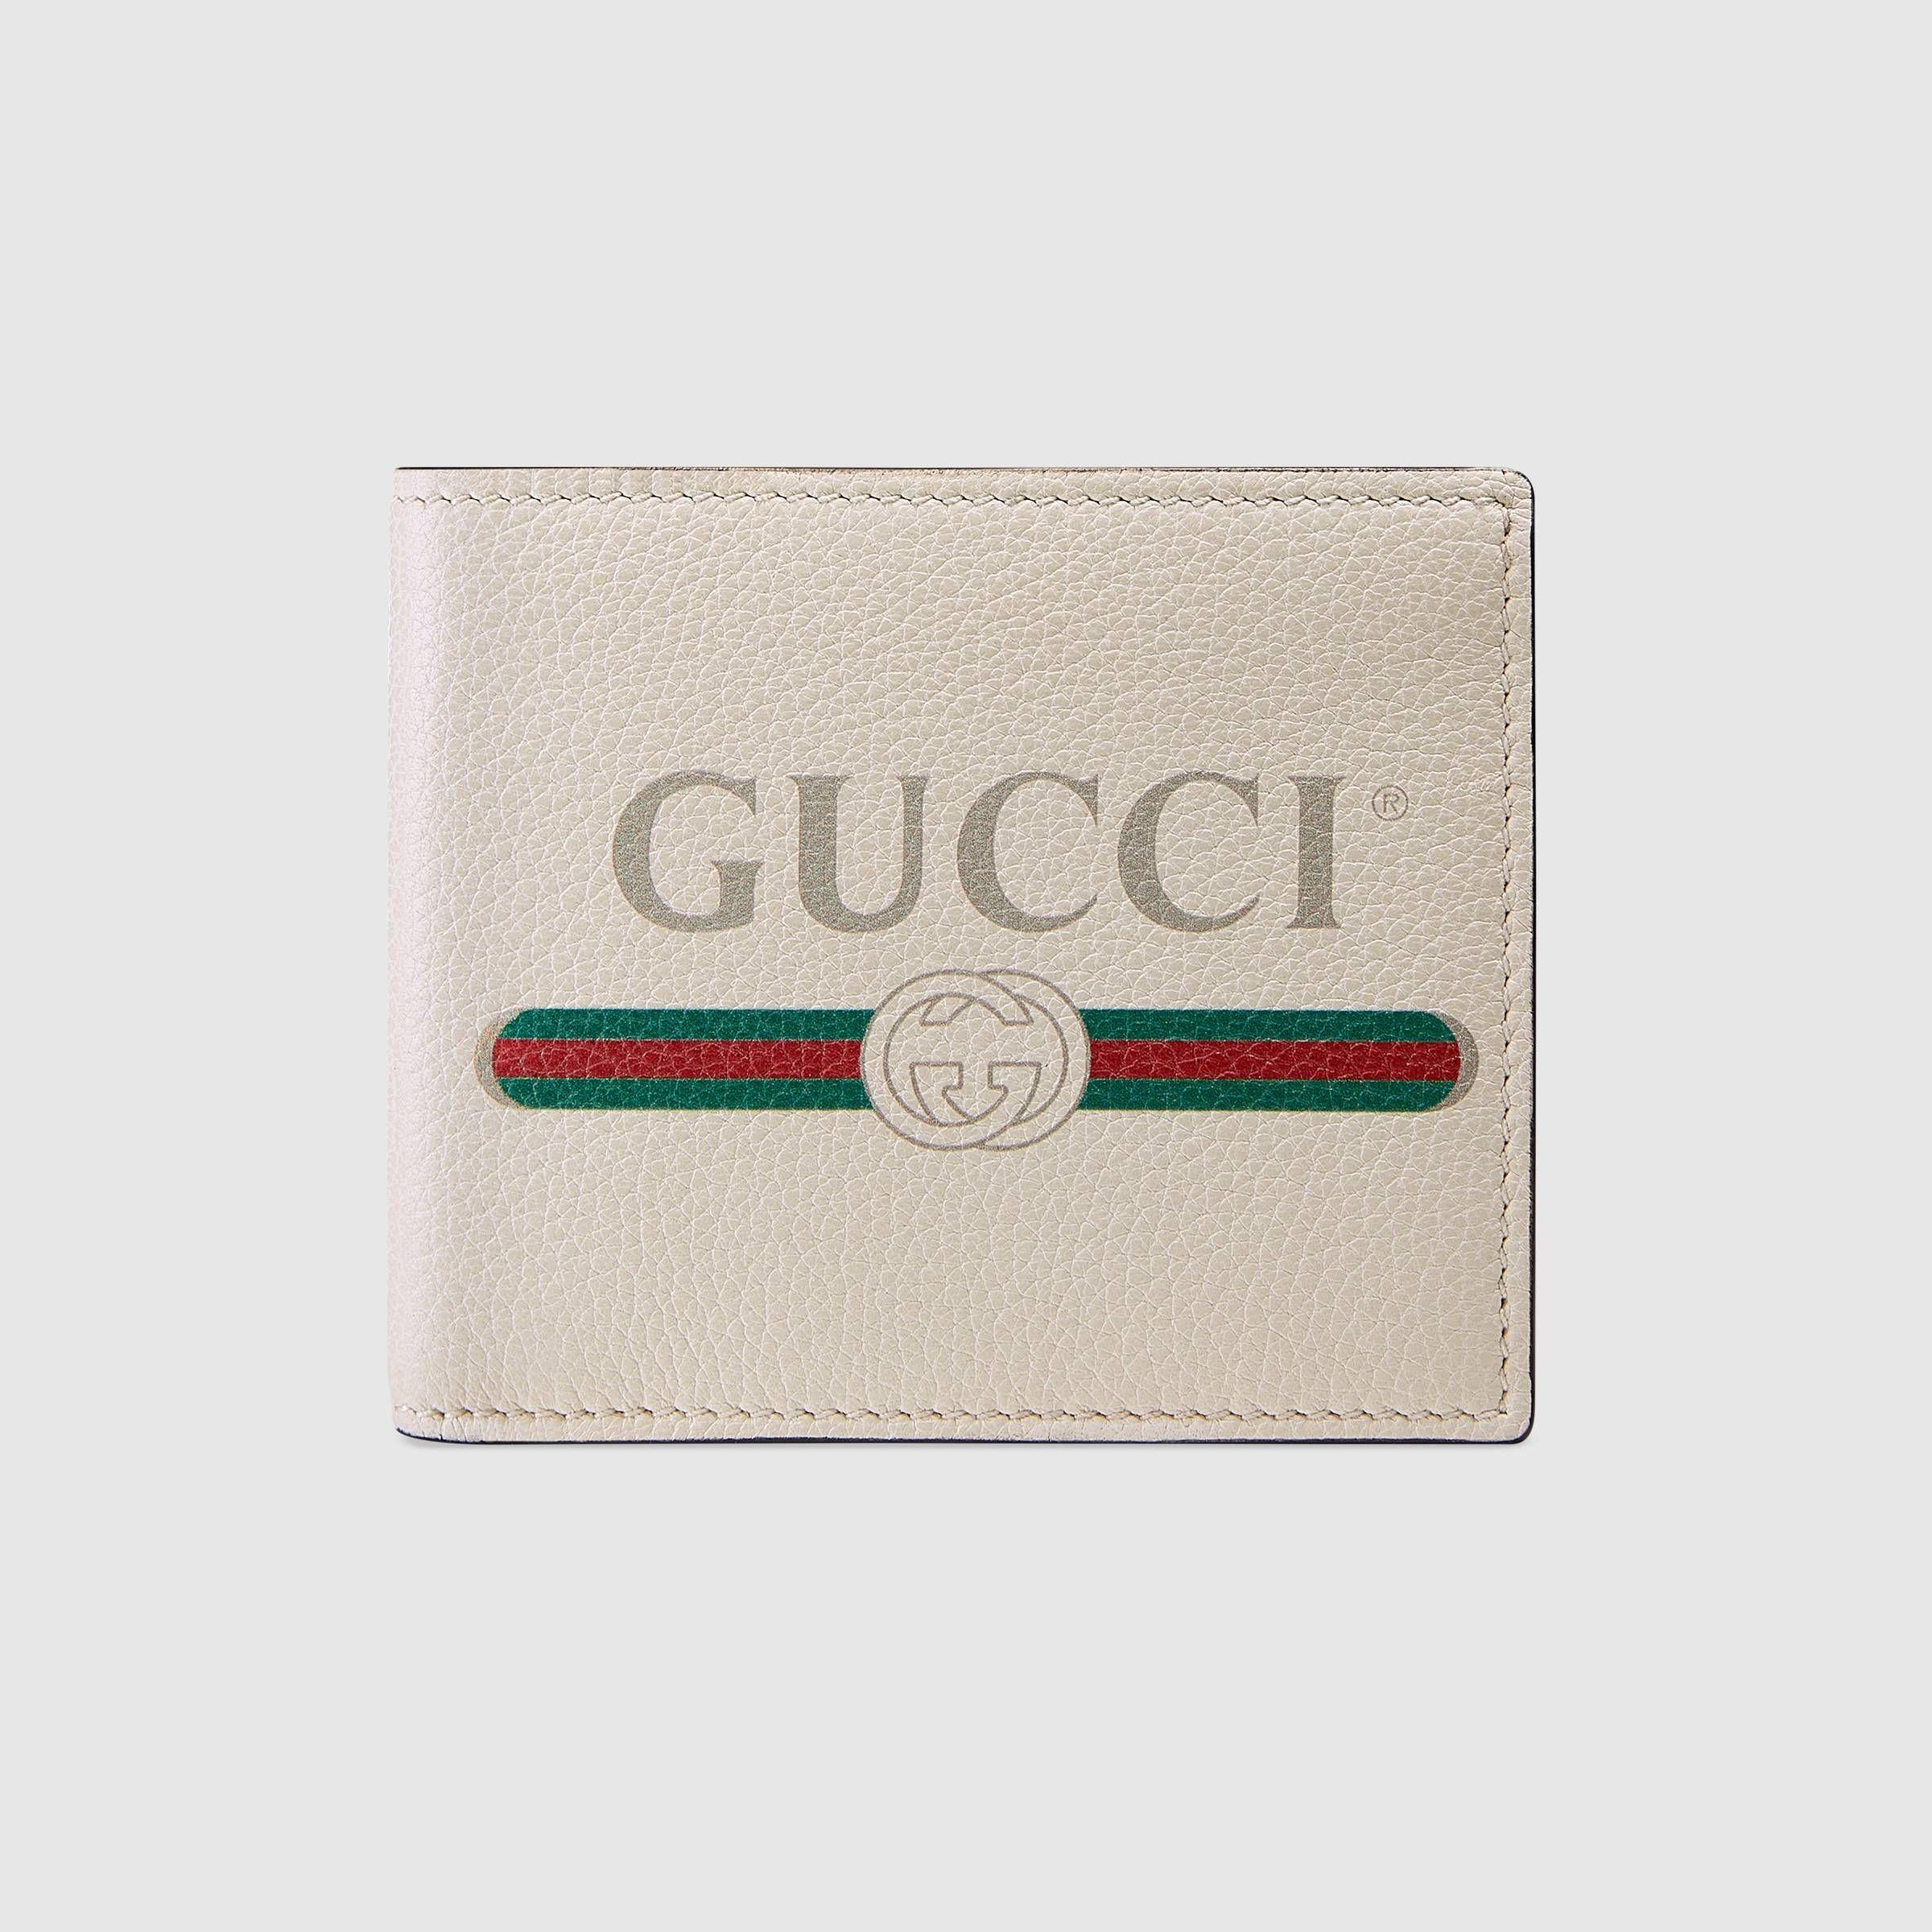 Colorful Gucci Logo - Gucci Print leather bi-fold wallet- Available Colors: white leather ...